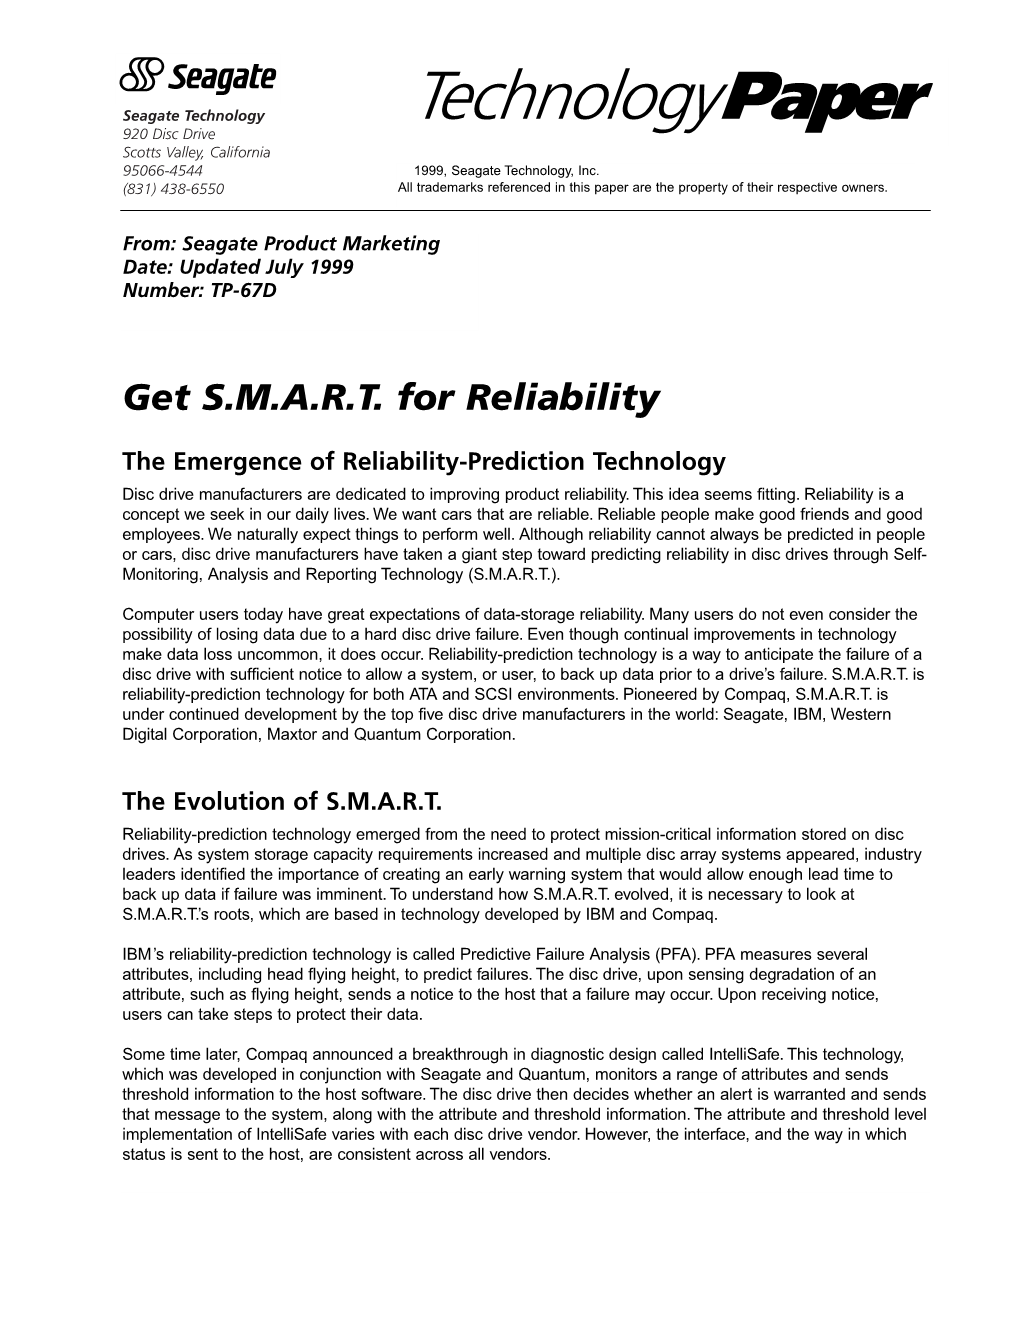 Get S.M.A.R.T. for Reliability